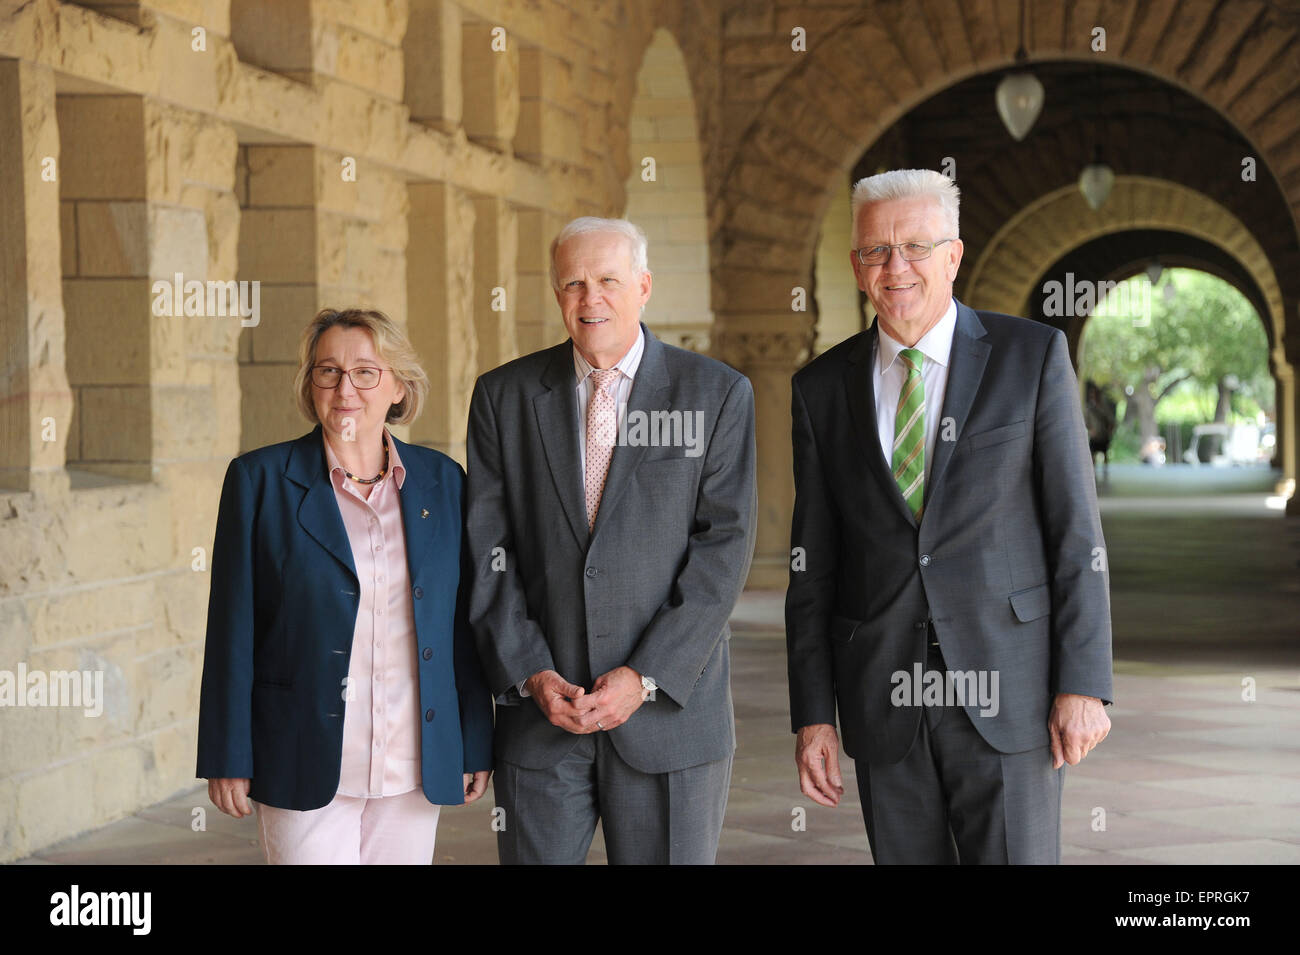 Stanford, USA. 21st May, 2015. Winfried Kretschmann (R), Premier of the German state Baden-Wuerttemberg, Theresia Bauer, the state's Minister of Science, and John Hennessy (C), President of Stanford University, pose following talks on the university campus in Stanford, USA, 21 May 2015. Kretschmann is on a four-day visit to California. Photo: Bettina Grachtrup/dpa/Alamy Live News Stock Photo